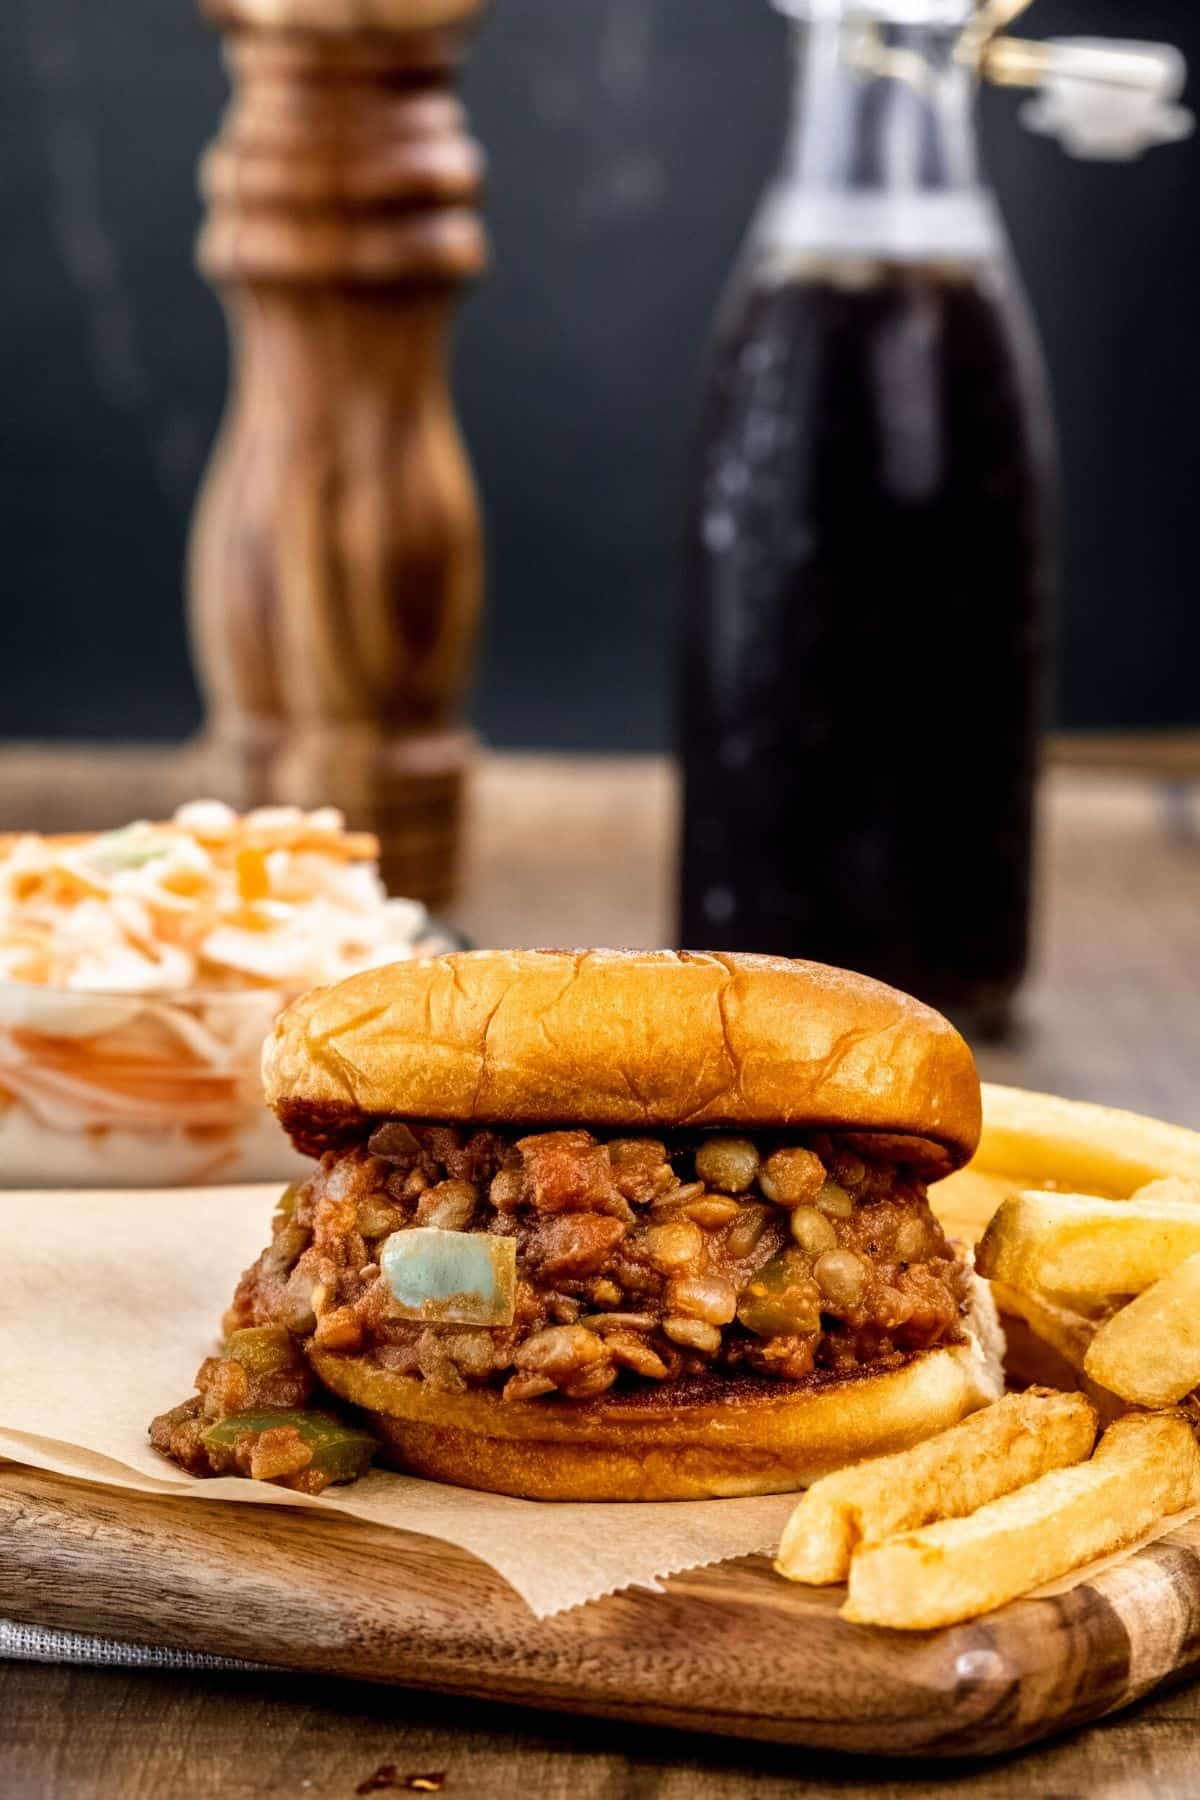 a lentil sloppy Joe on a toasted bun next to a pile of French fries. it is on a serving board. a bowl of coleslaw and a bottle of soda are blurred in the background.